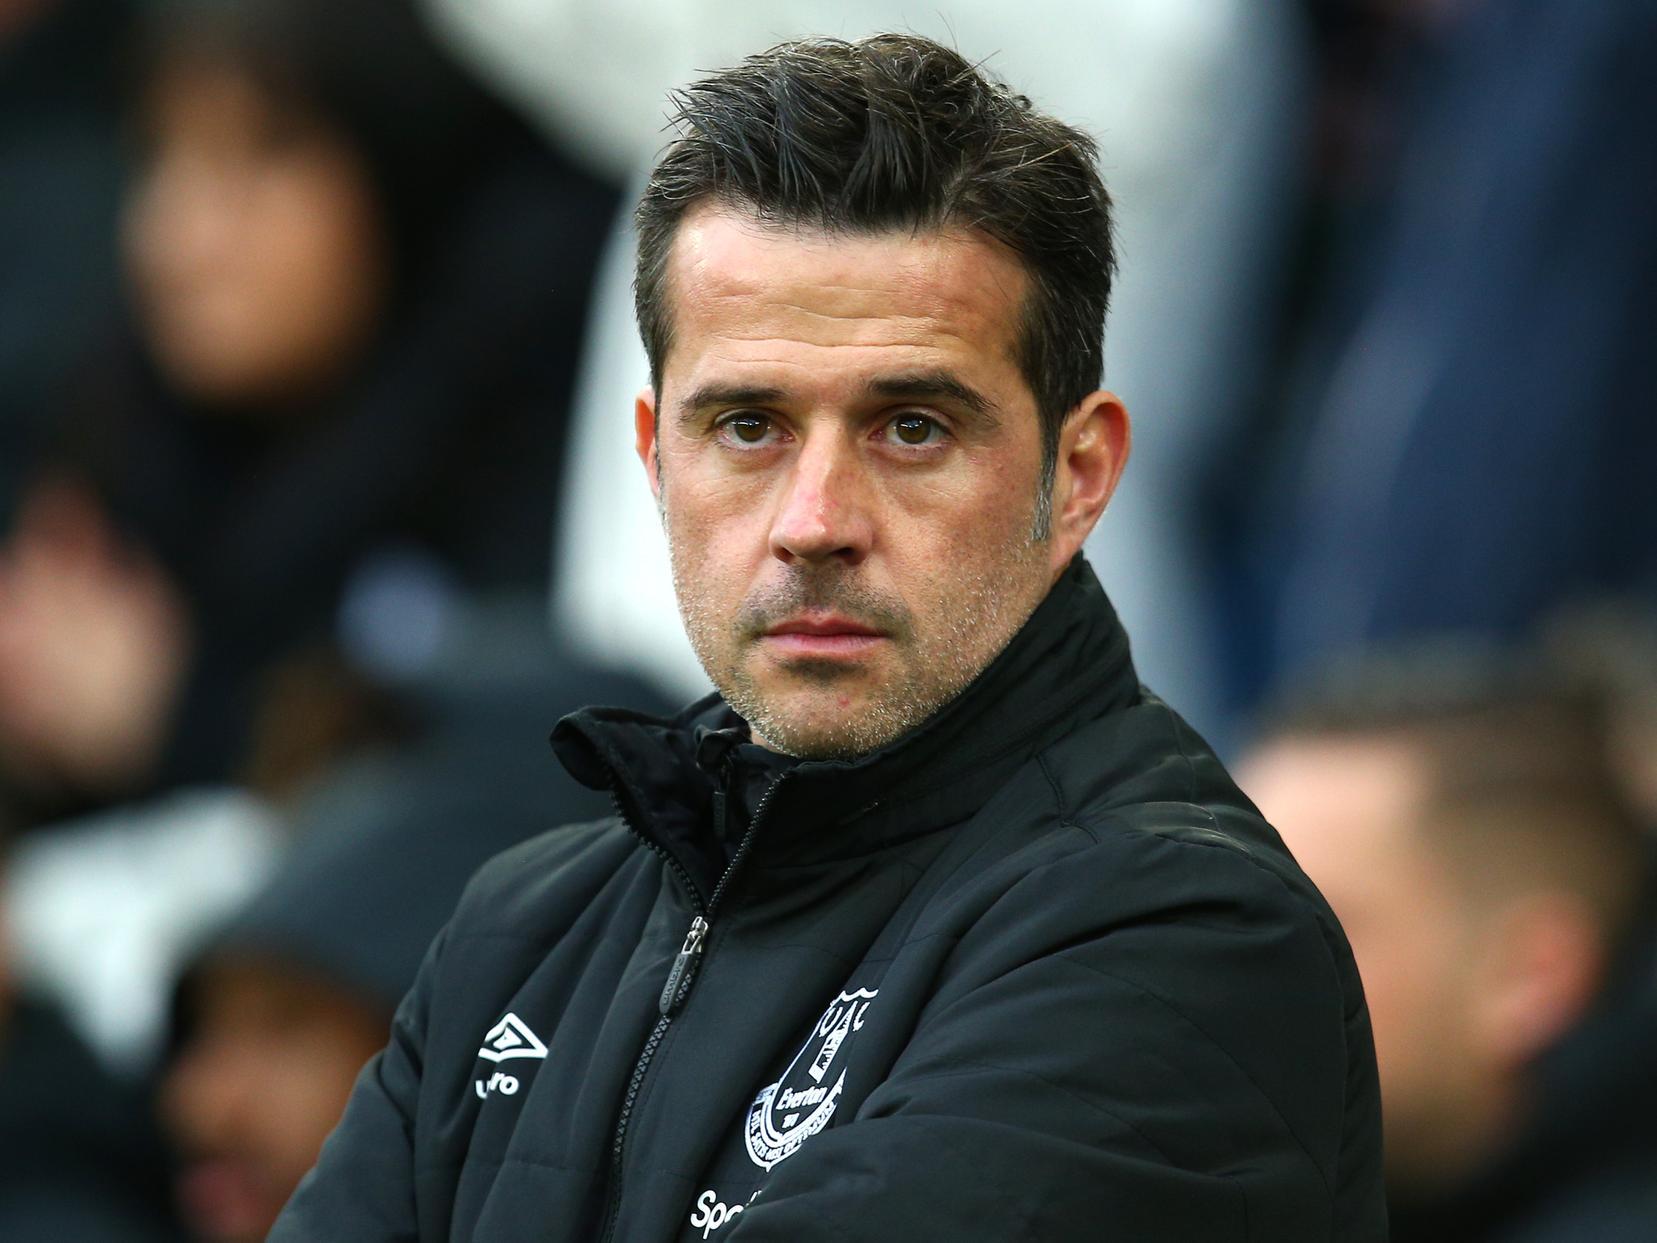 The Everton manager has been the front-runner to get the chop on two occasions, but he lives to fight another day. Seven points from four games has helped extend his stay at Goodison Park.